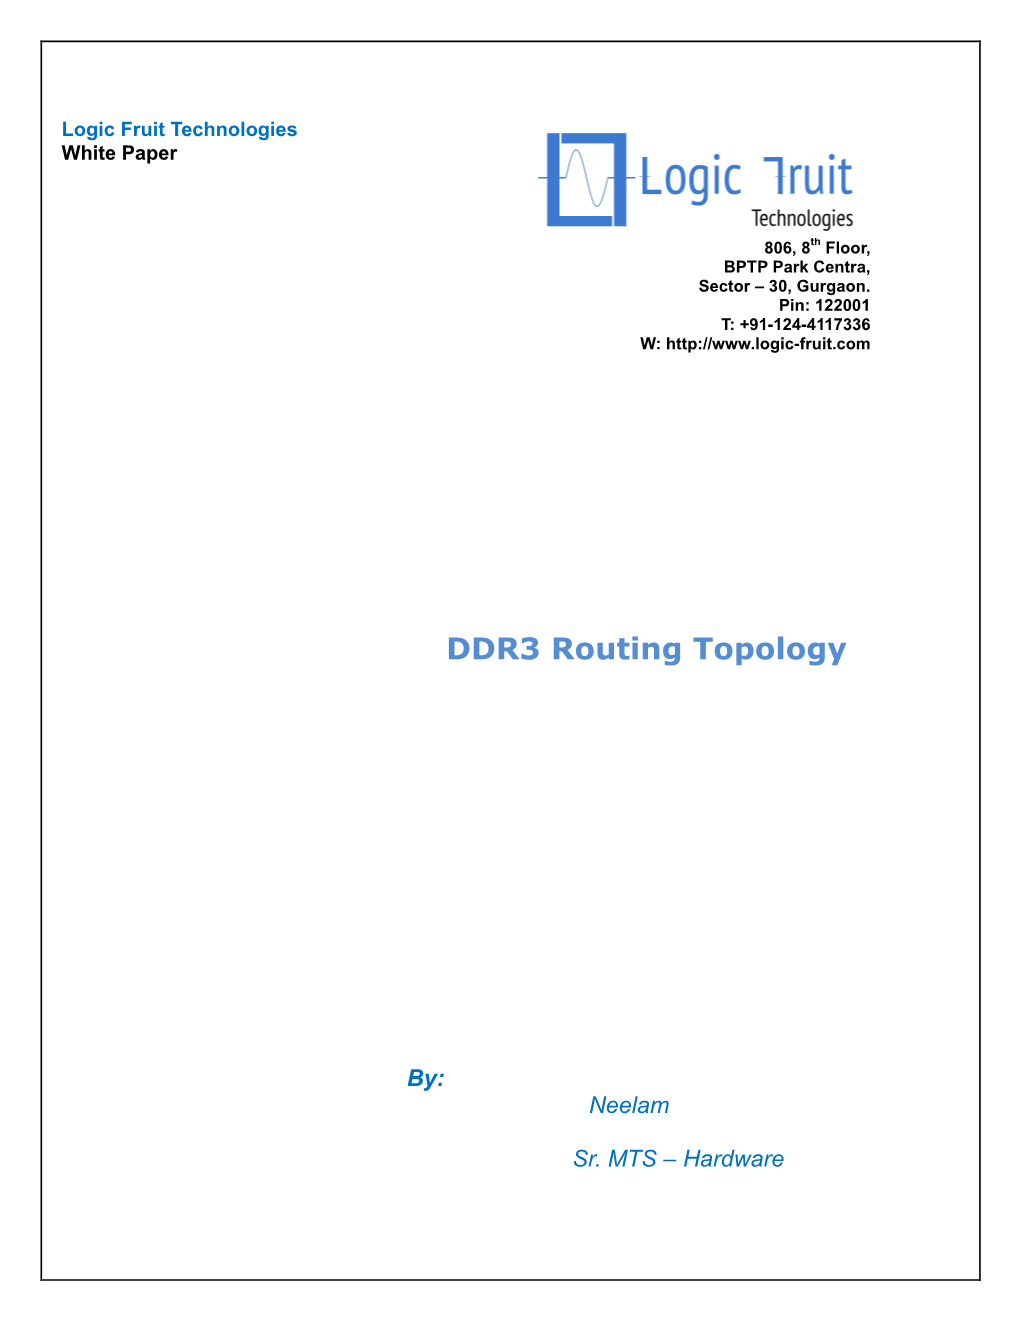 DDR3 Routing Topology